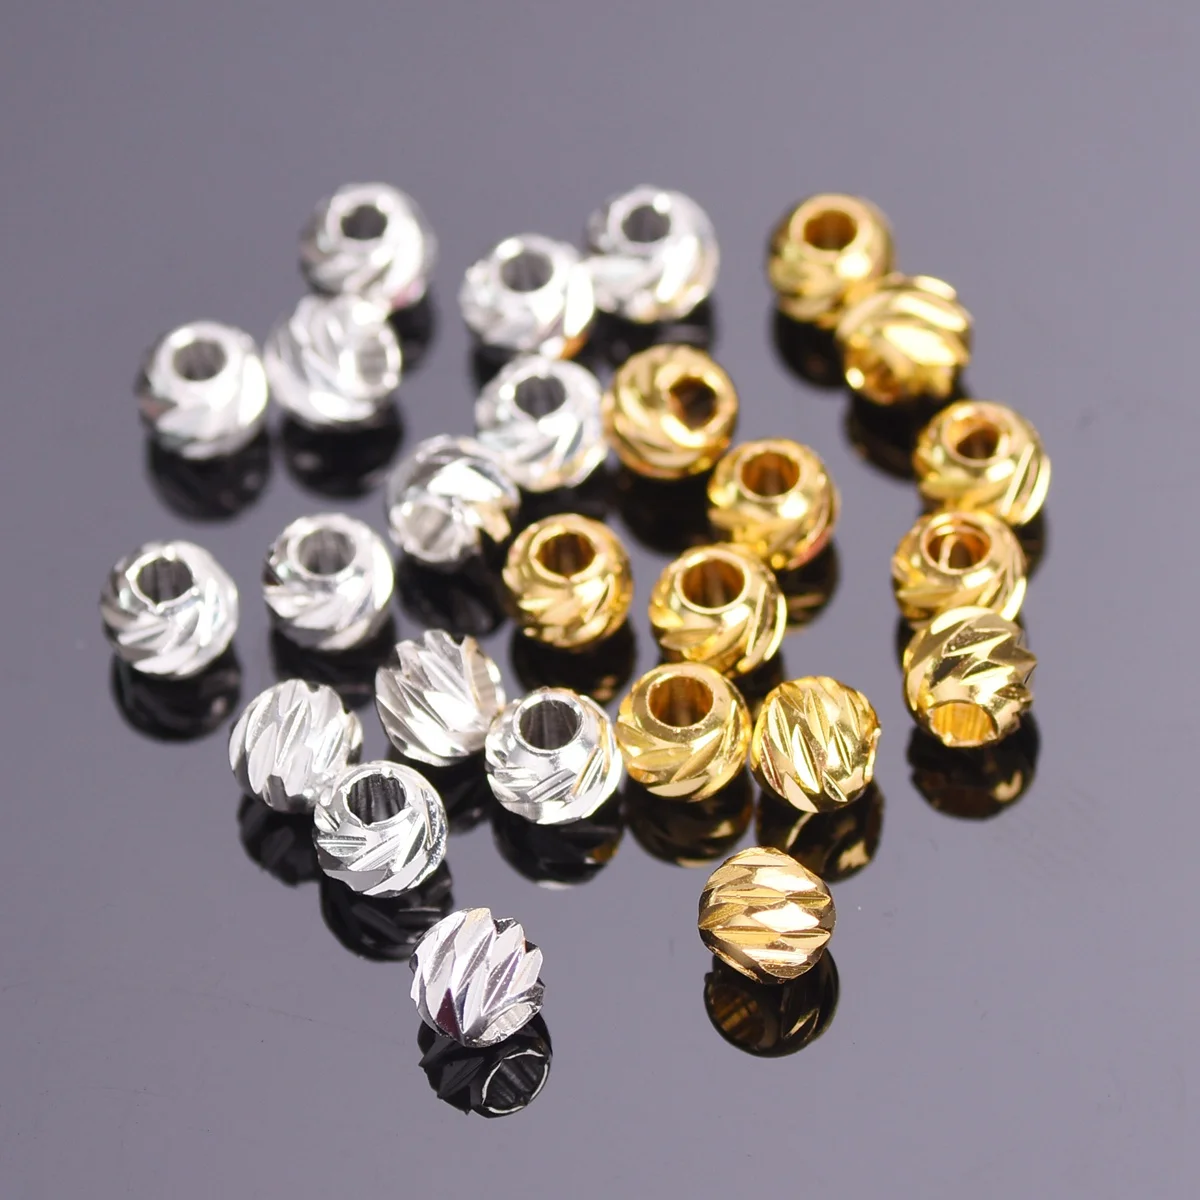 Round Carved 3mm 4mm 5mm 6mm 8mm Gold Color Silver Color Plated Brass Metal Loose Spacer Beads For Jewelry Making 50pcs tibetan silver color metal alloy loose spacer beads lot for earring necklace bracelet jewelry making findings diy crafts